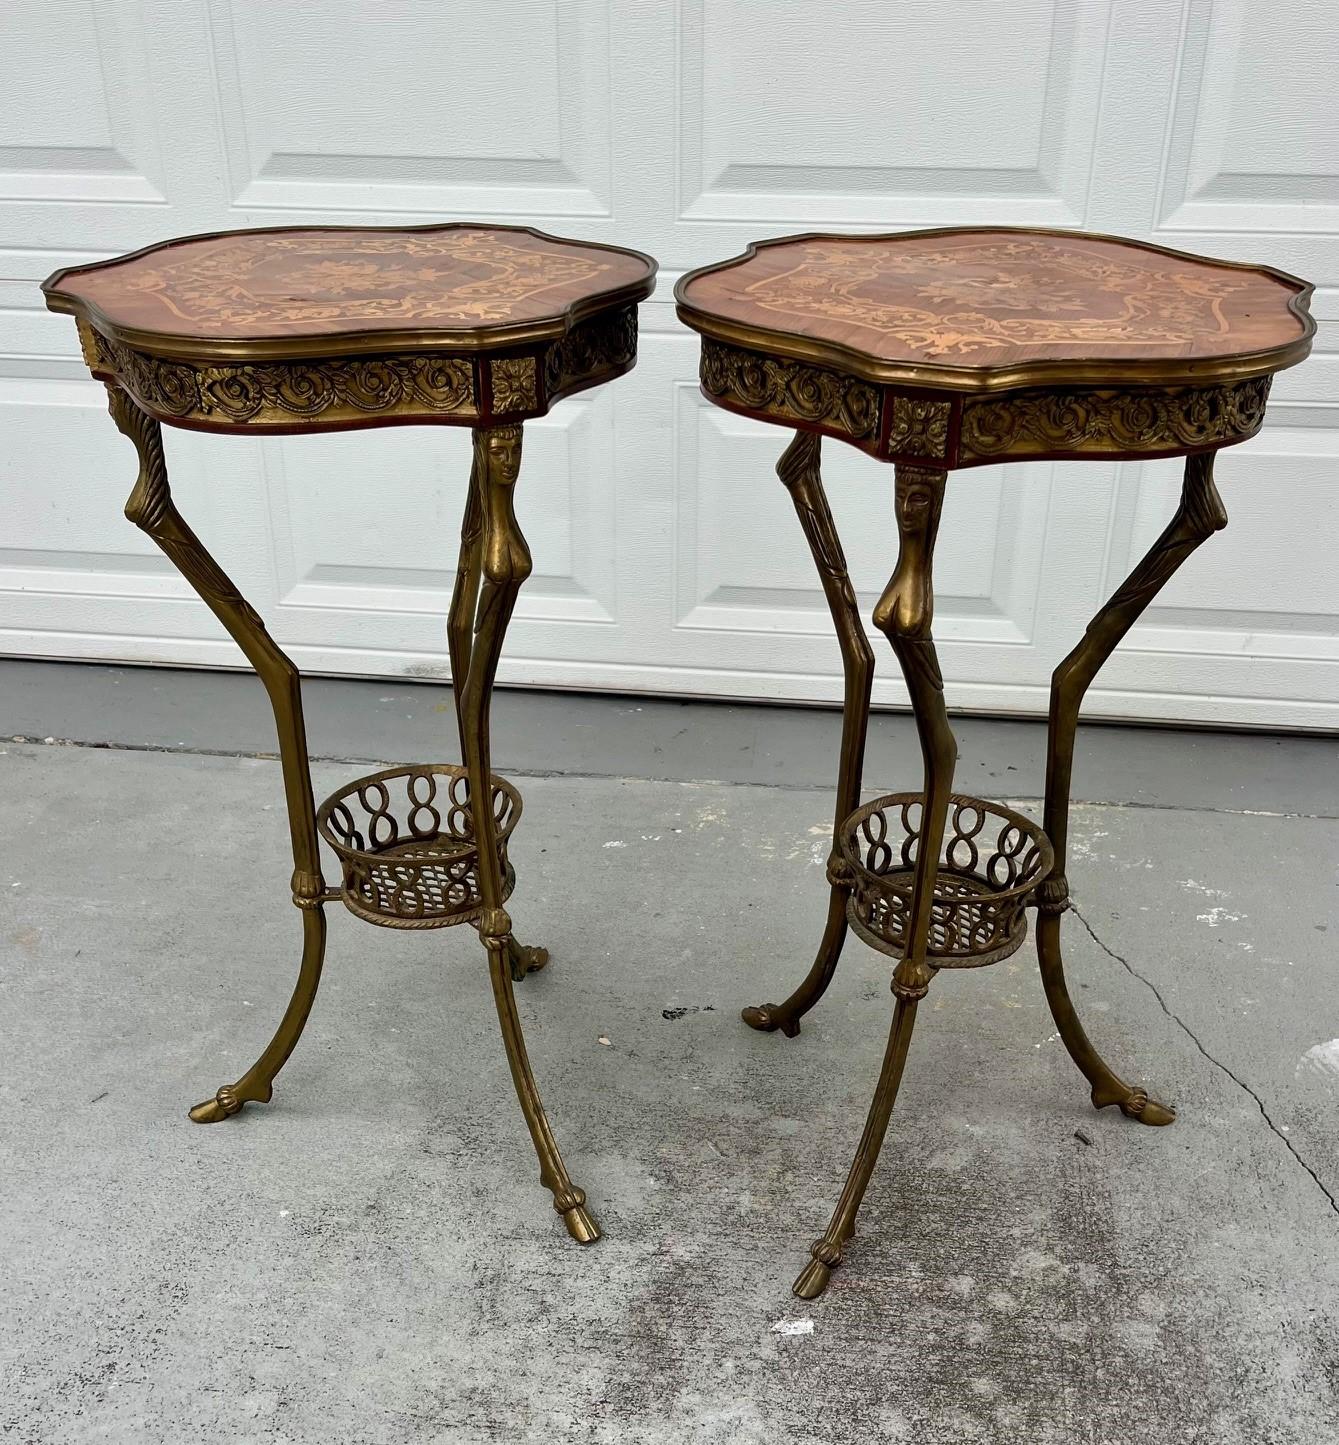 Pair of most elegant French 20th century Louis XVI style Gueridons side tables. The base is a solid bronze tripod pedestal supporting an openwork bronze basket with cast female heads terminating in hoofed feet. The fine marquetry top, inlaid with